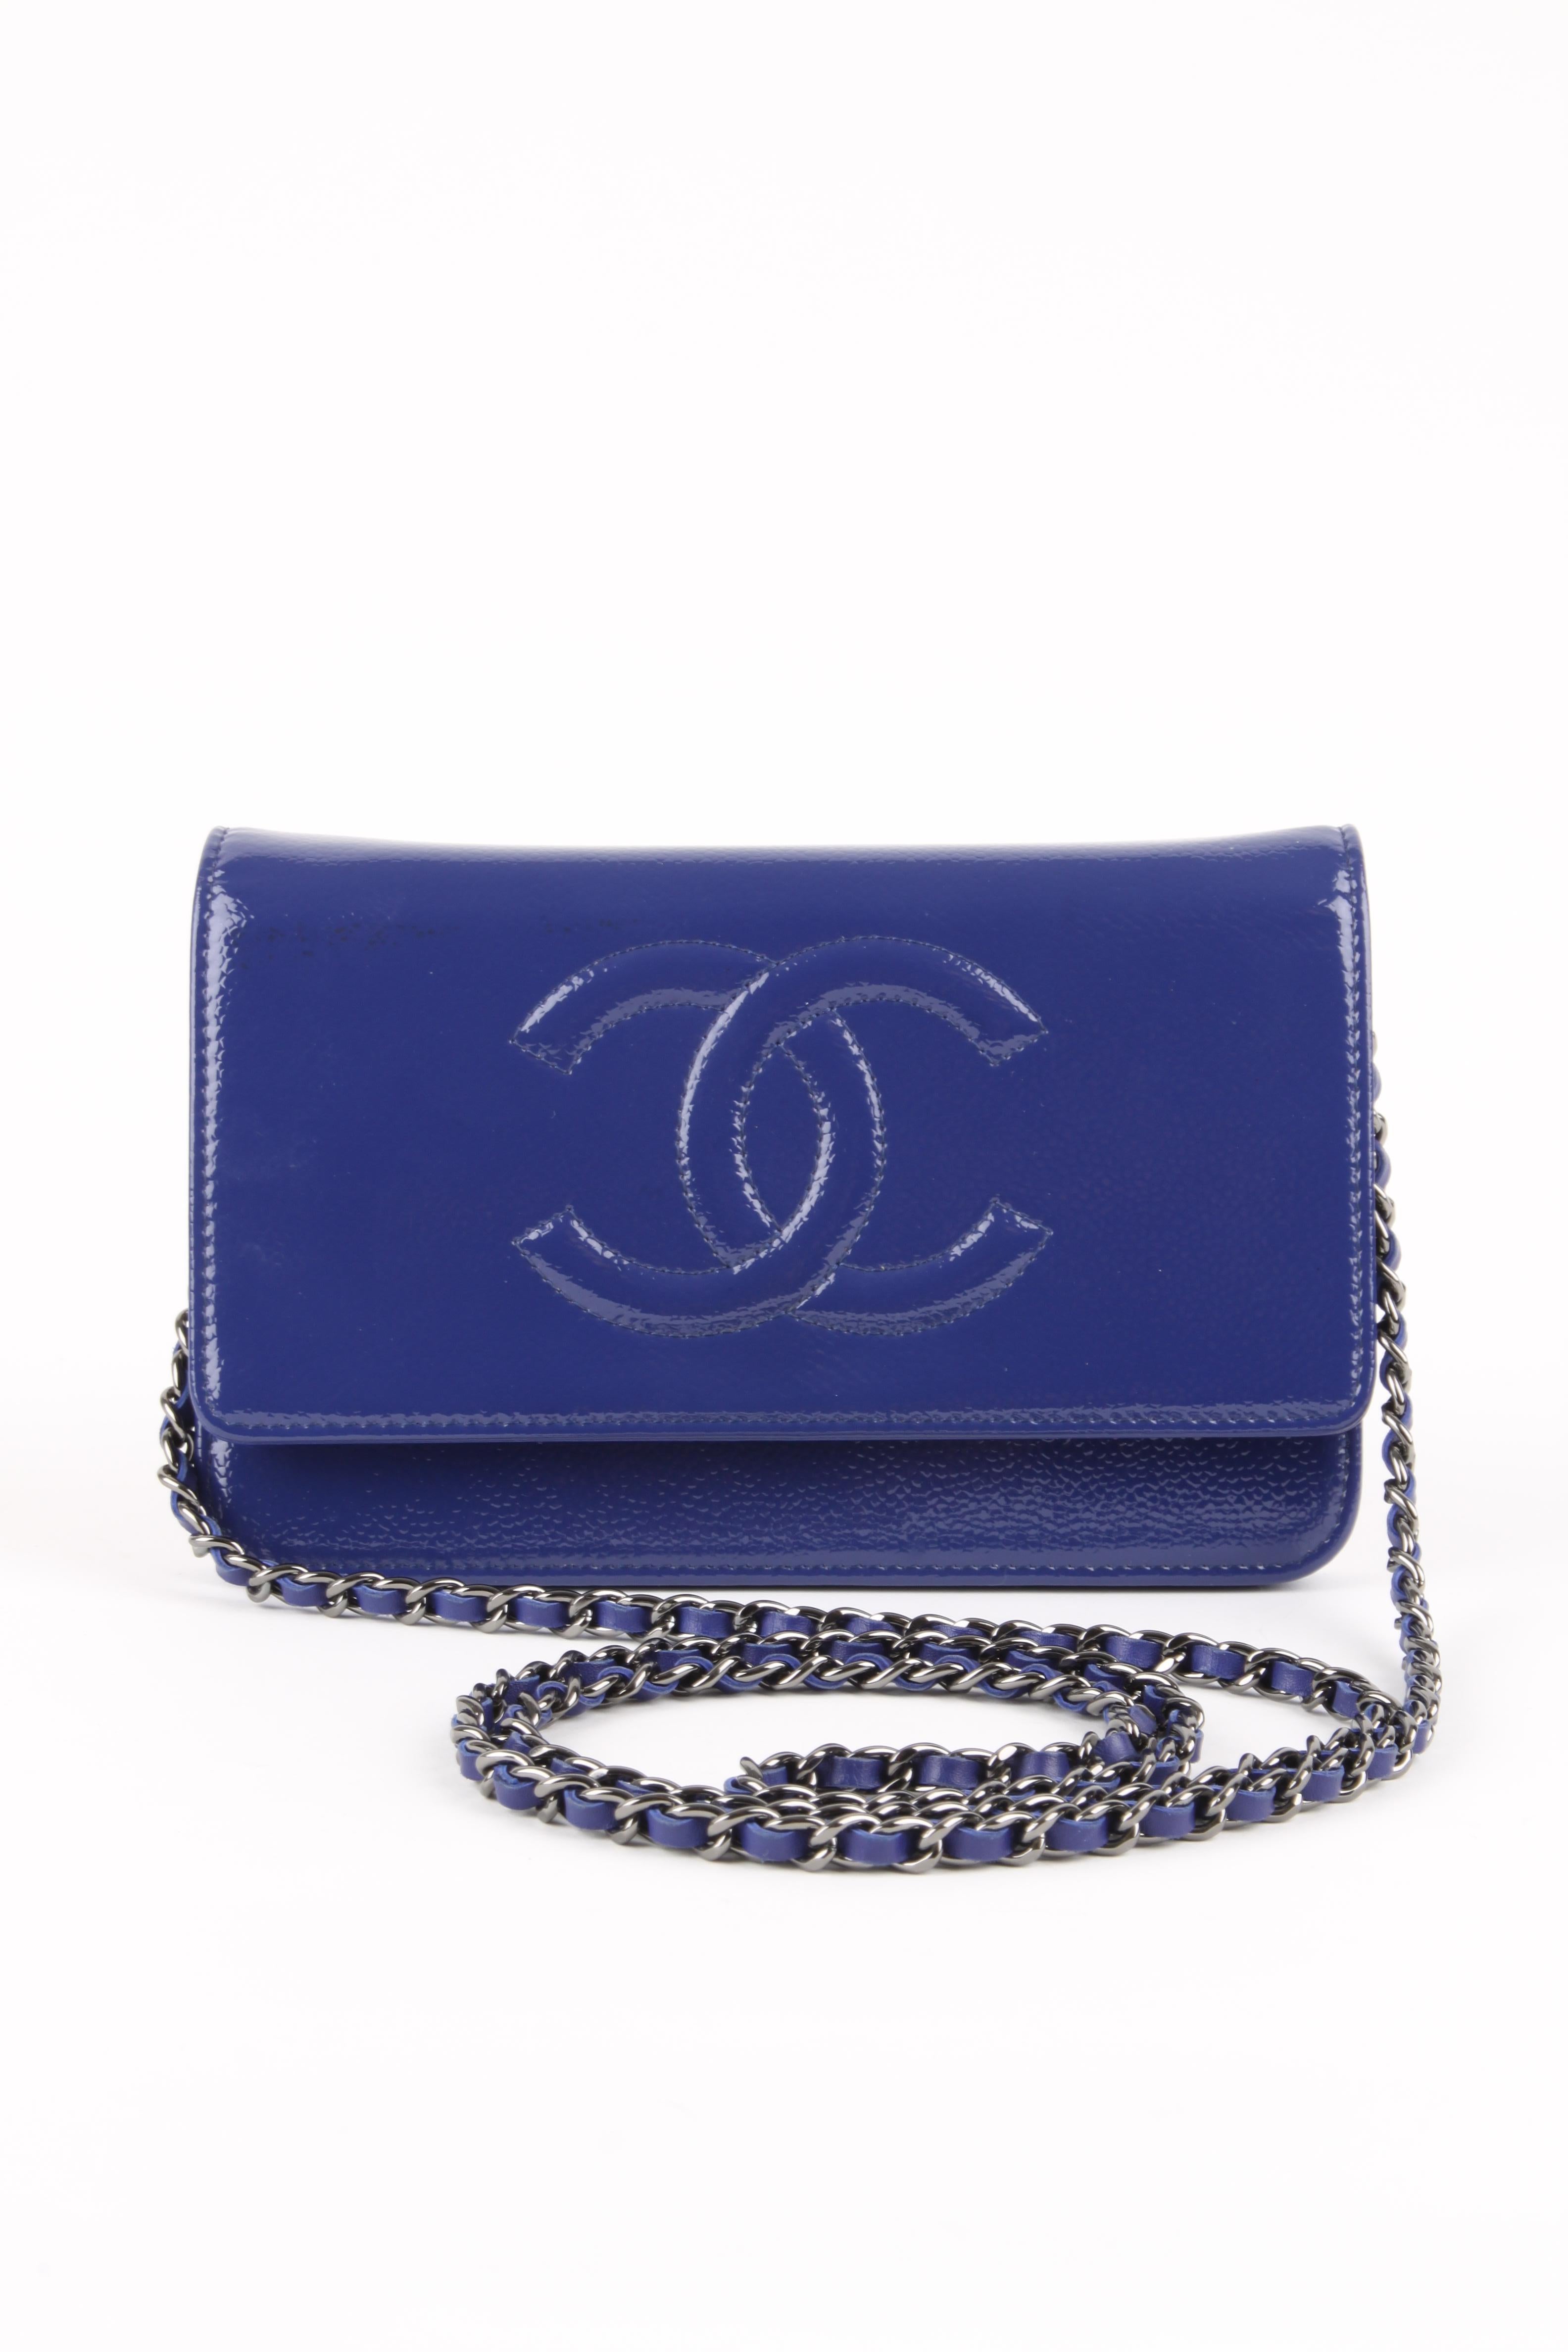 Highly desirable Chanel bag; it is the Wallet on Chain! Wearable on the shoulder and also cross body, of course.

Shiny blue patent leather and silver hardware, a large embroidered interlocking CC logo on the flap. The chain has blue leather